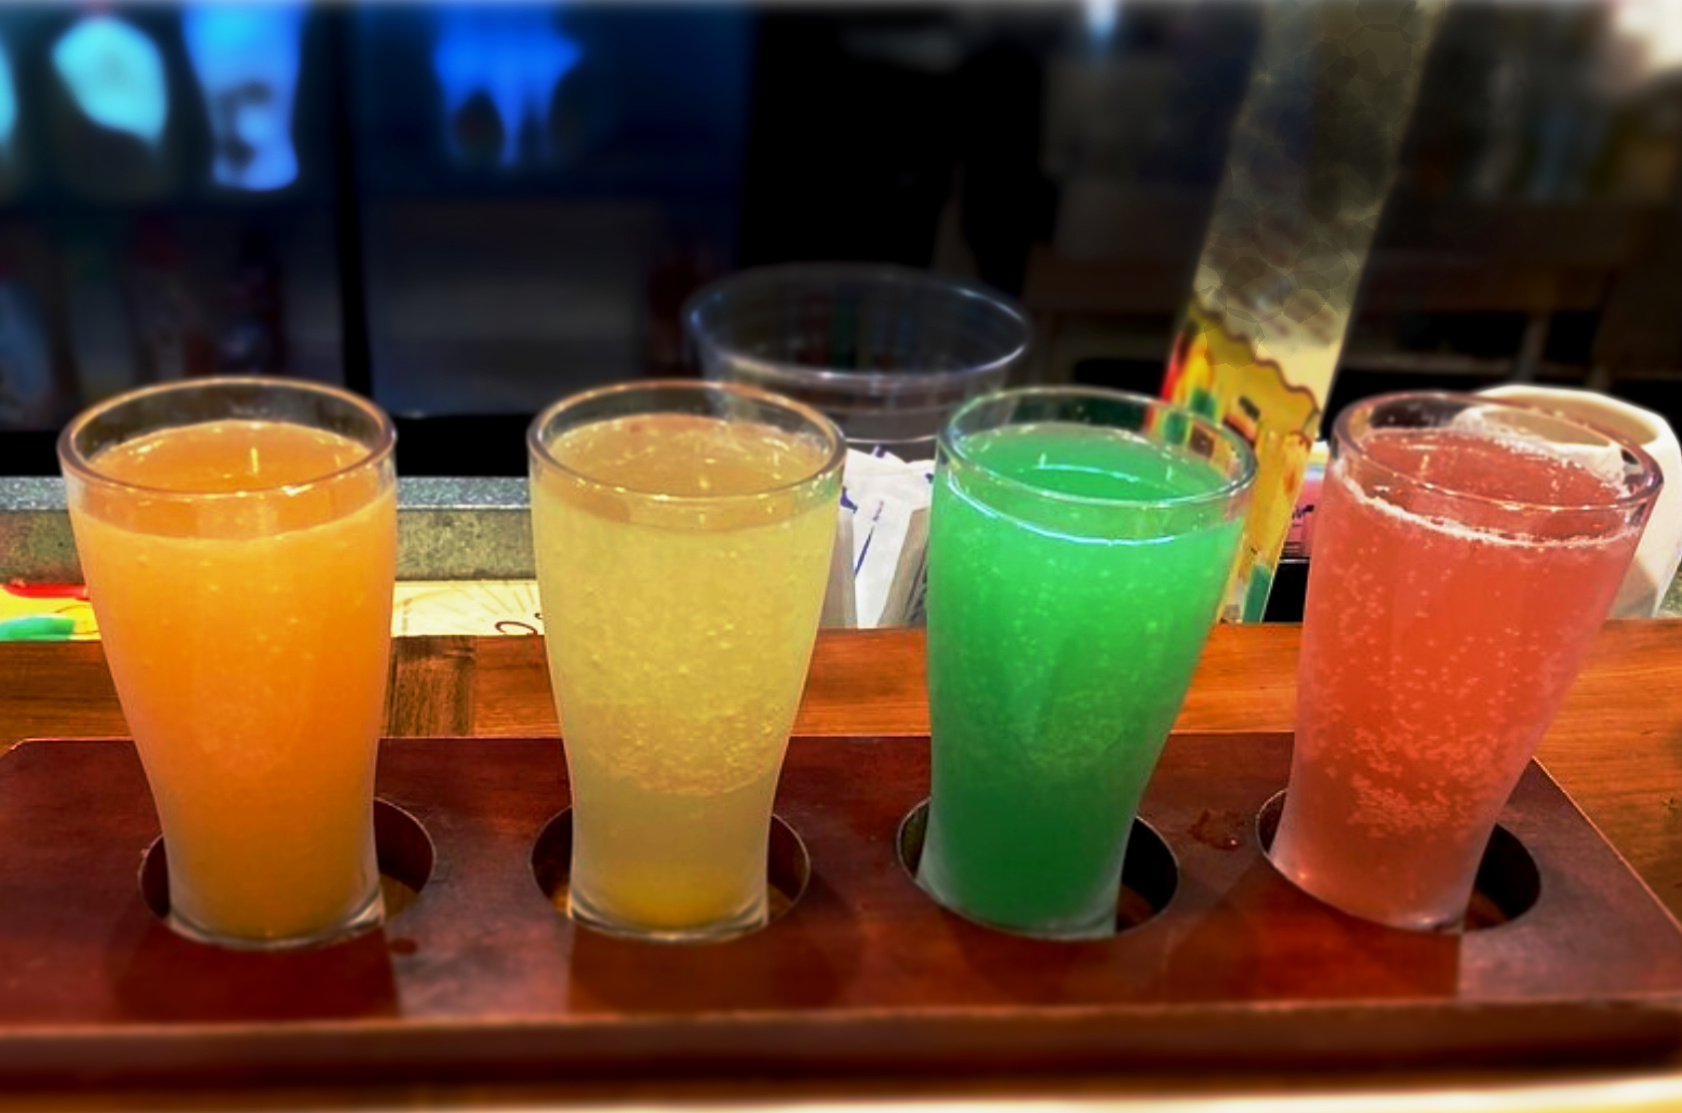 Four glasses of different colored drinks on a wooden tray.